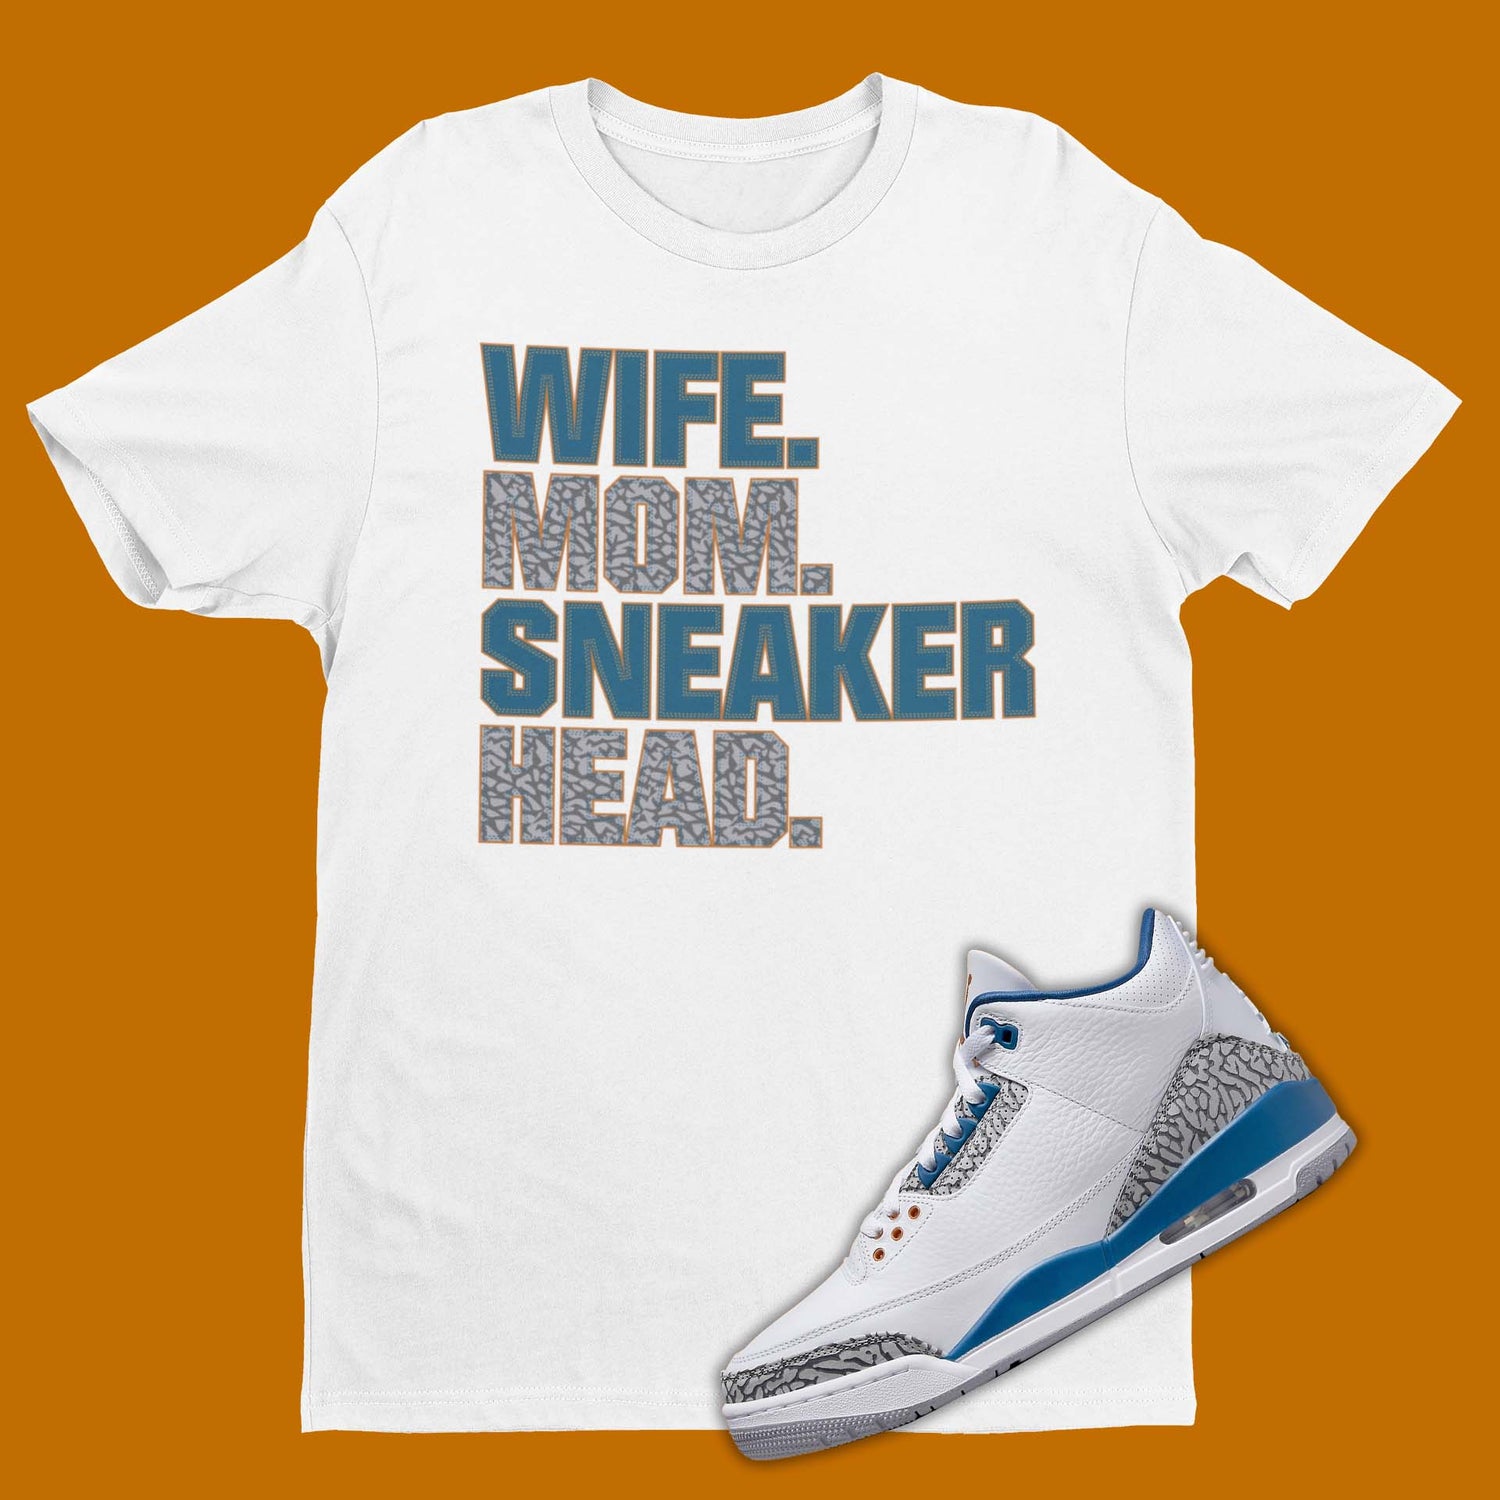 The perfect wife mom sneakerhead shirt to match your sneakers! Our Match Jordan 3 t-shirt is made to compliment your kicks. Bring your sneakers to the next level with this Wizards Air Jordan 3 shirt. Match and feel trendy with this graphic tee!